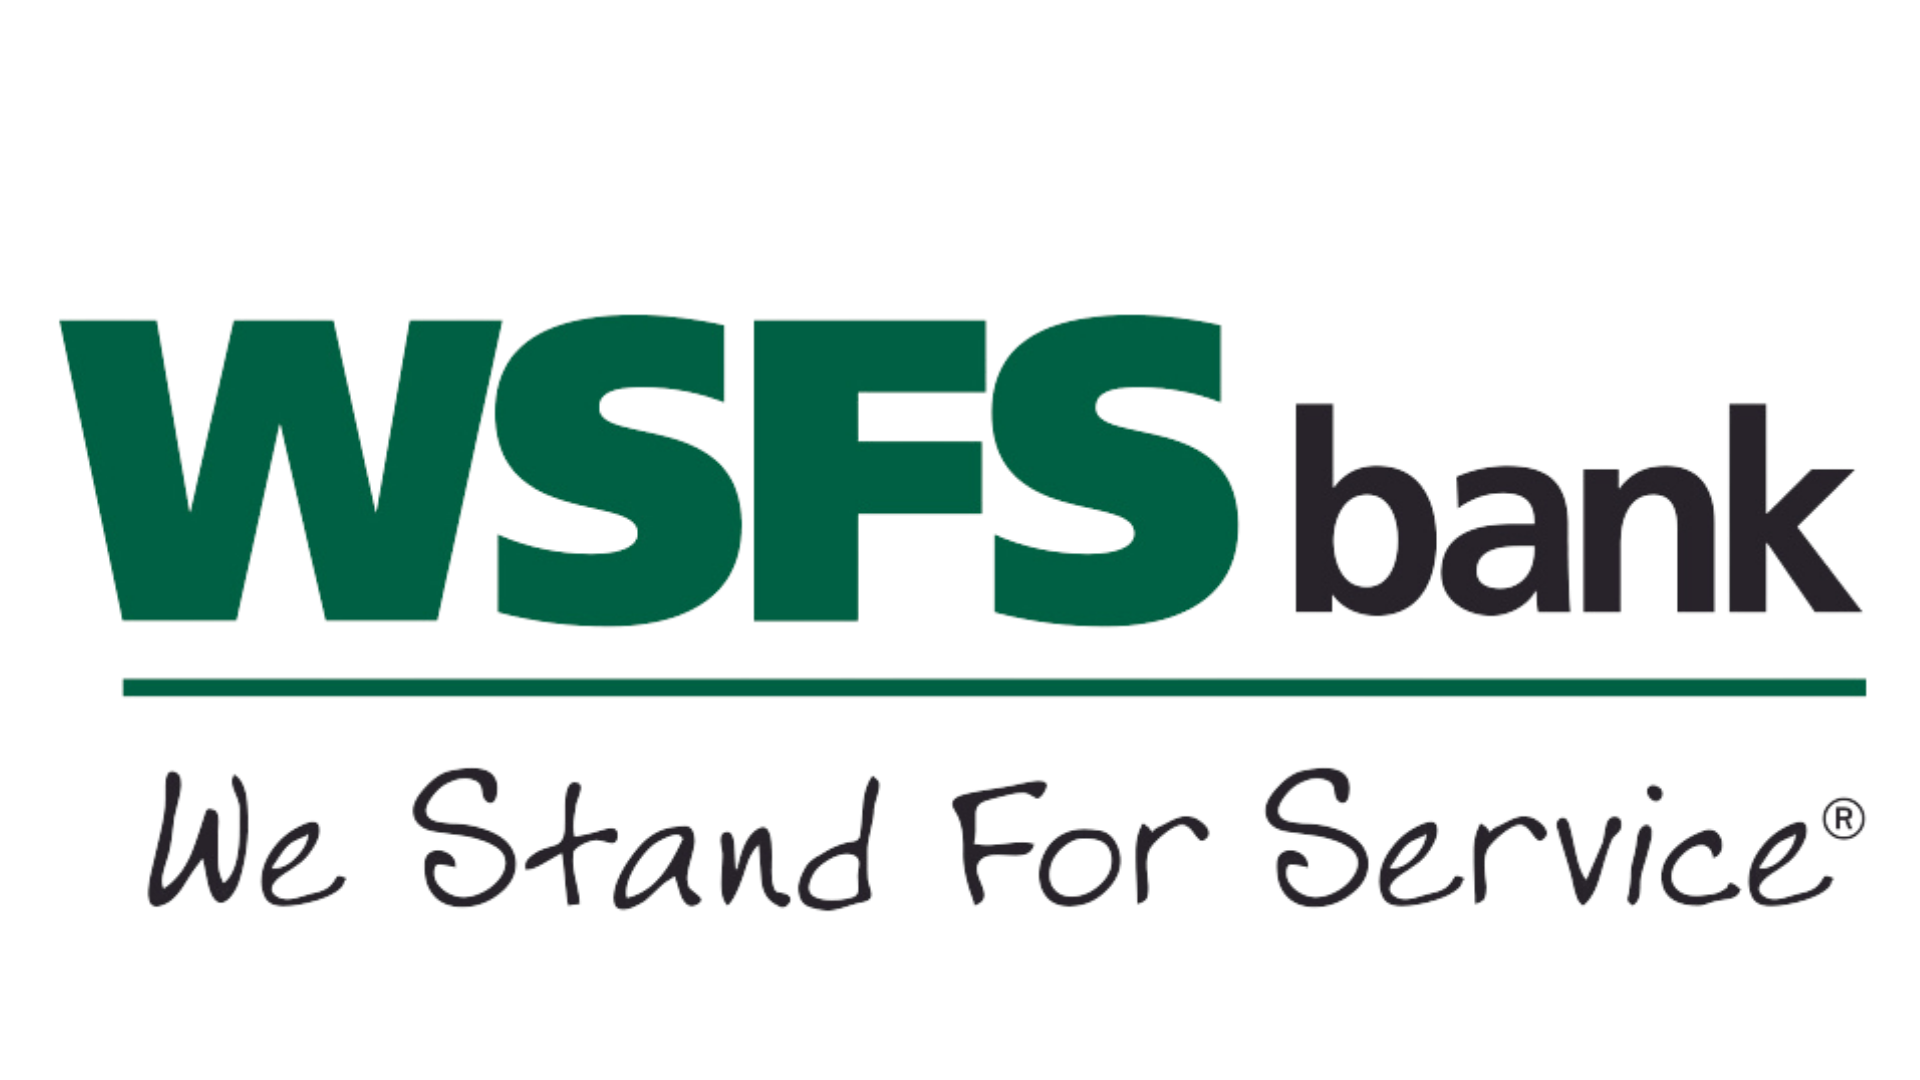 Defender of Youth WSFS Bank